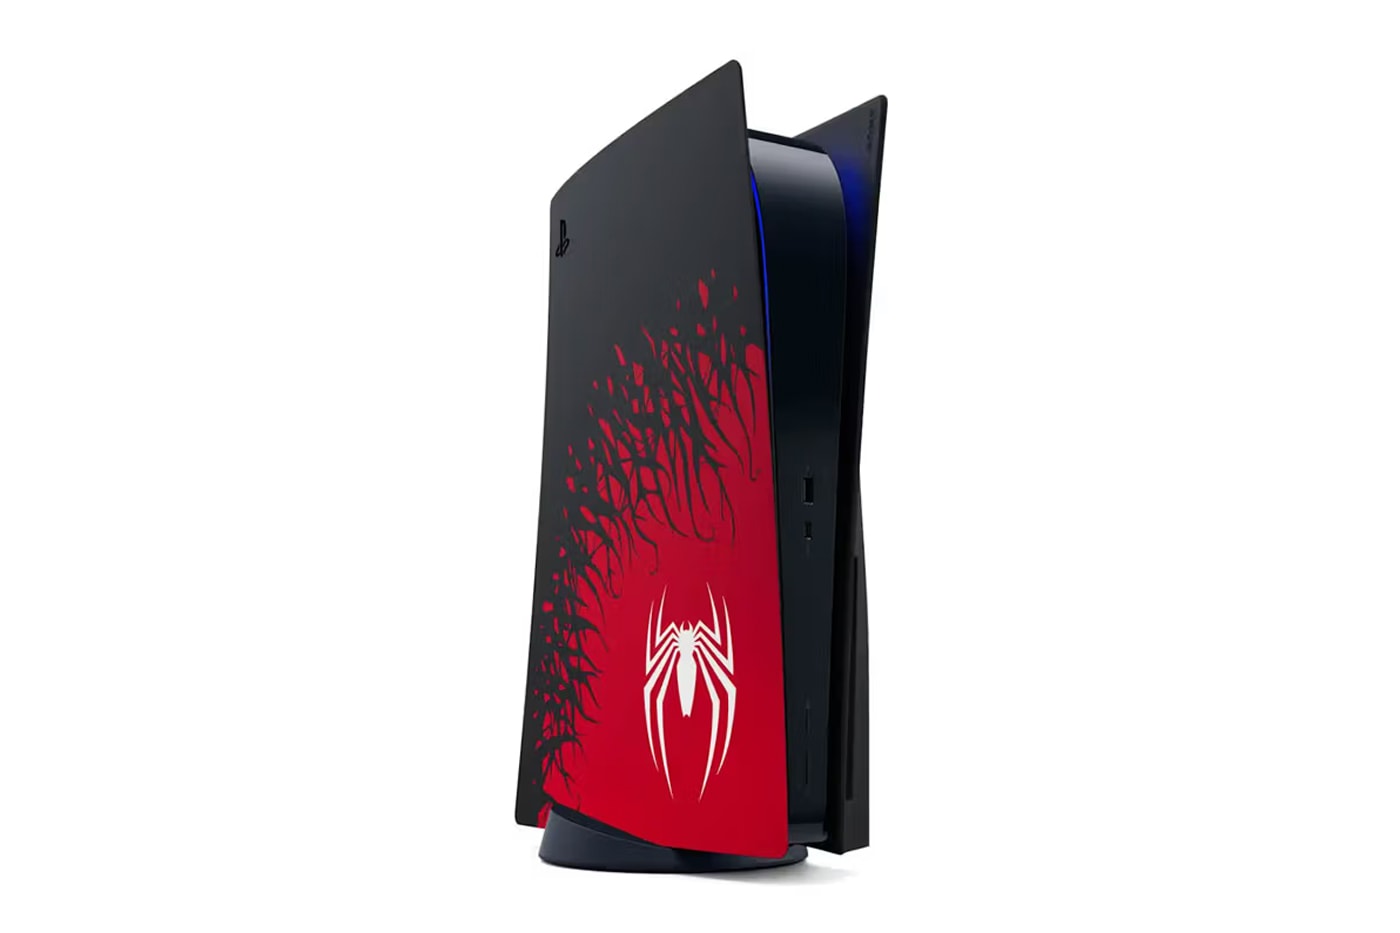 Sony Marvel Limited-Edition Spider-Man PS5 Console Controller Bundle order price retail website faceplate dualsense video game set